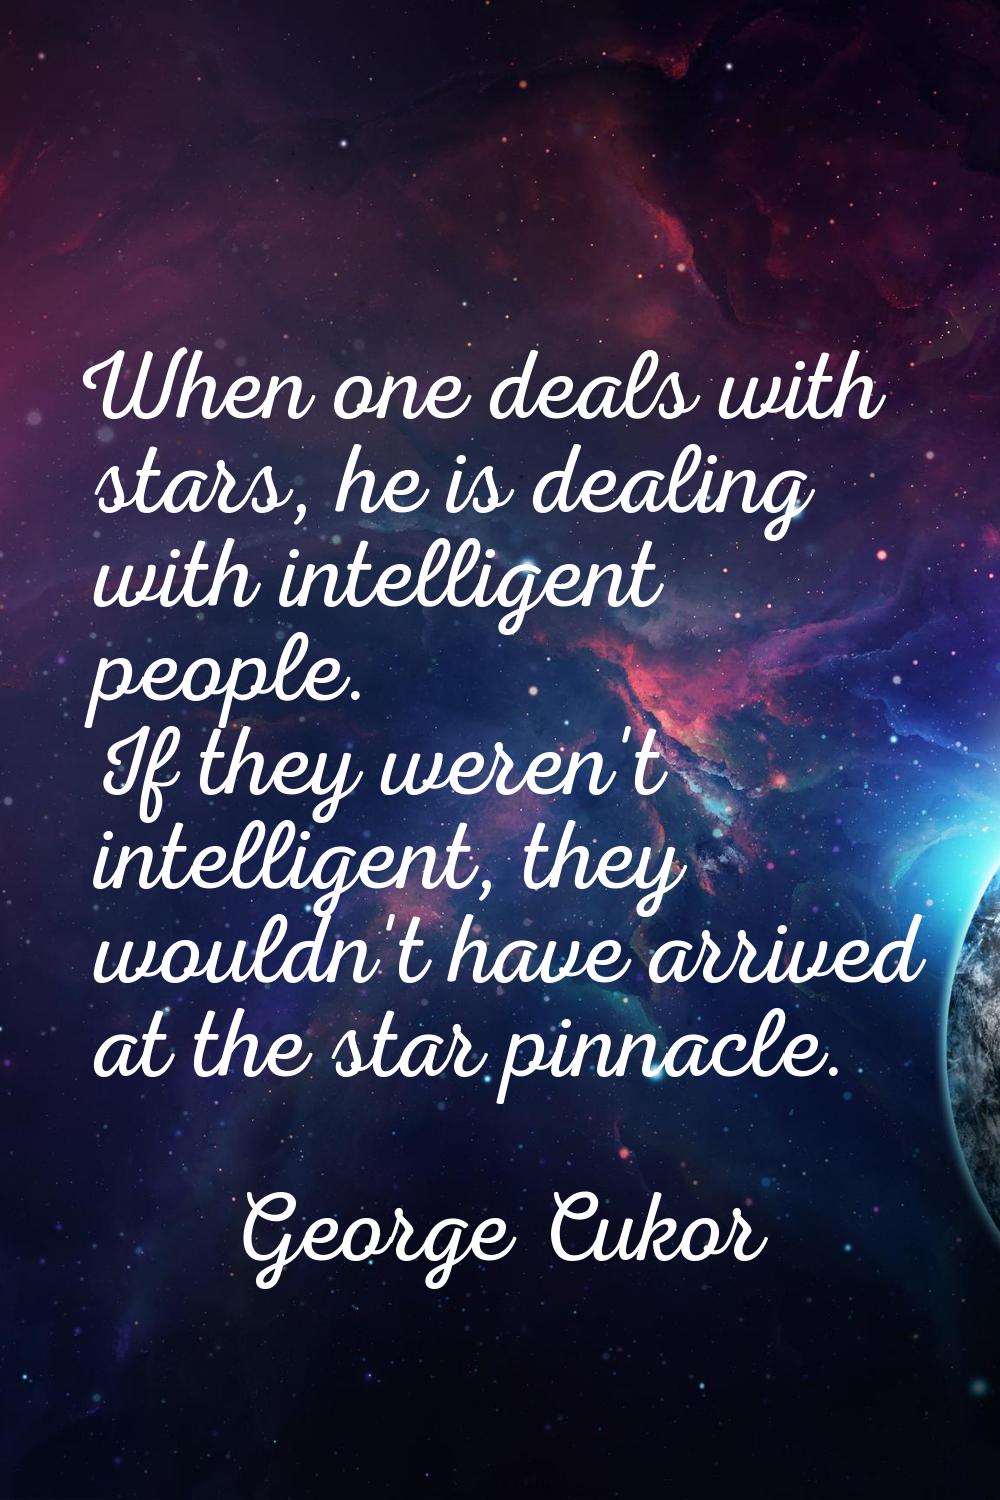 When one deals with stars, he is dealing with intelligent people. If they weren't intelligent, they